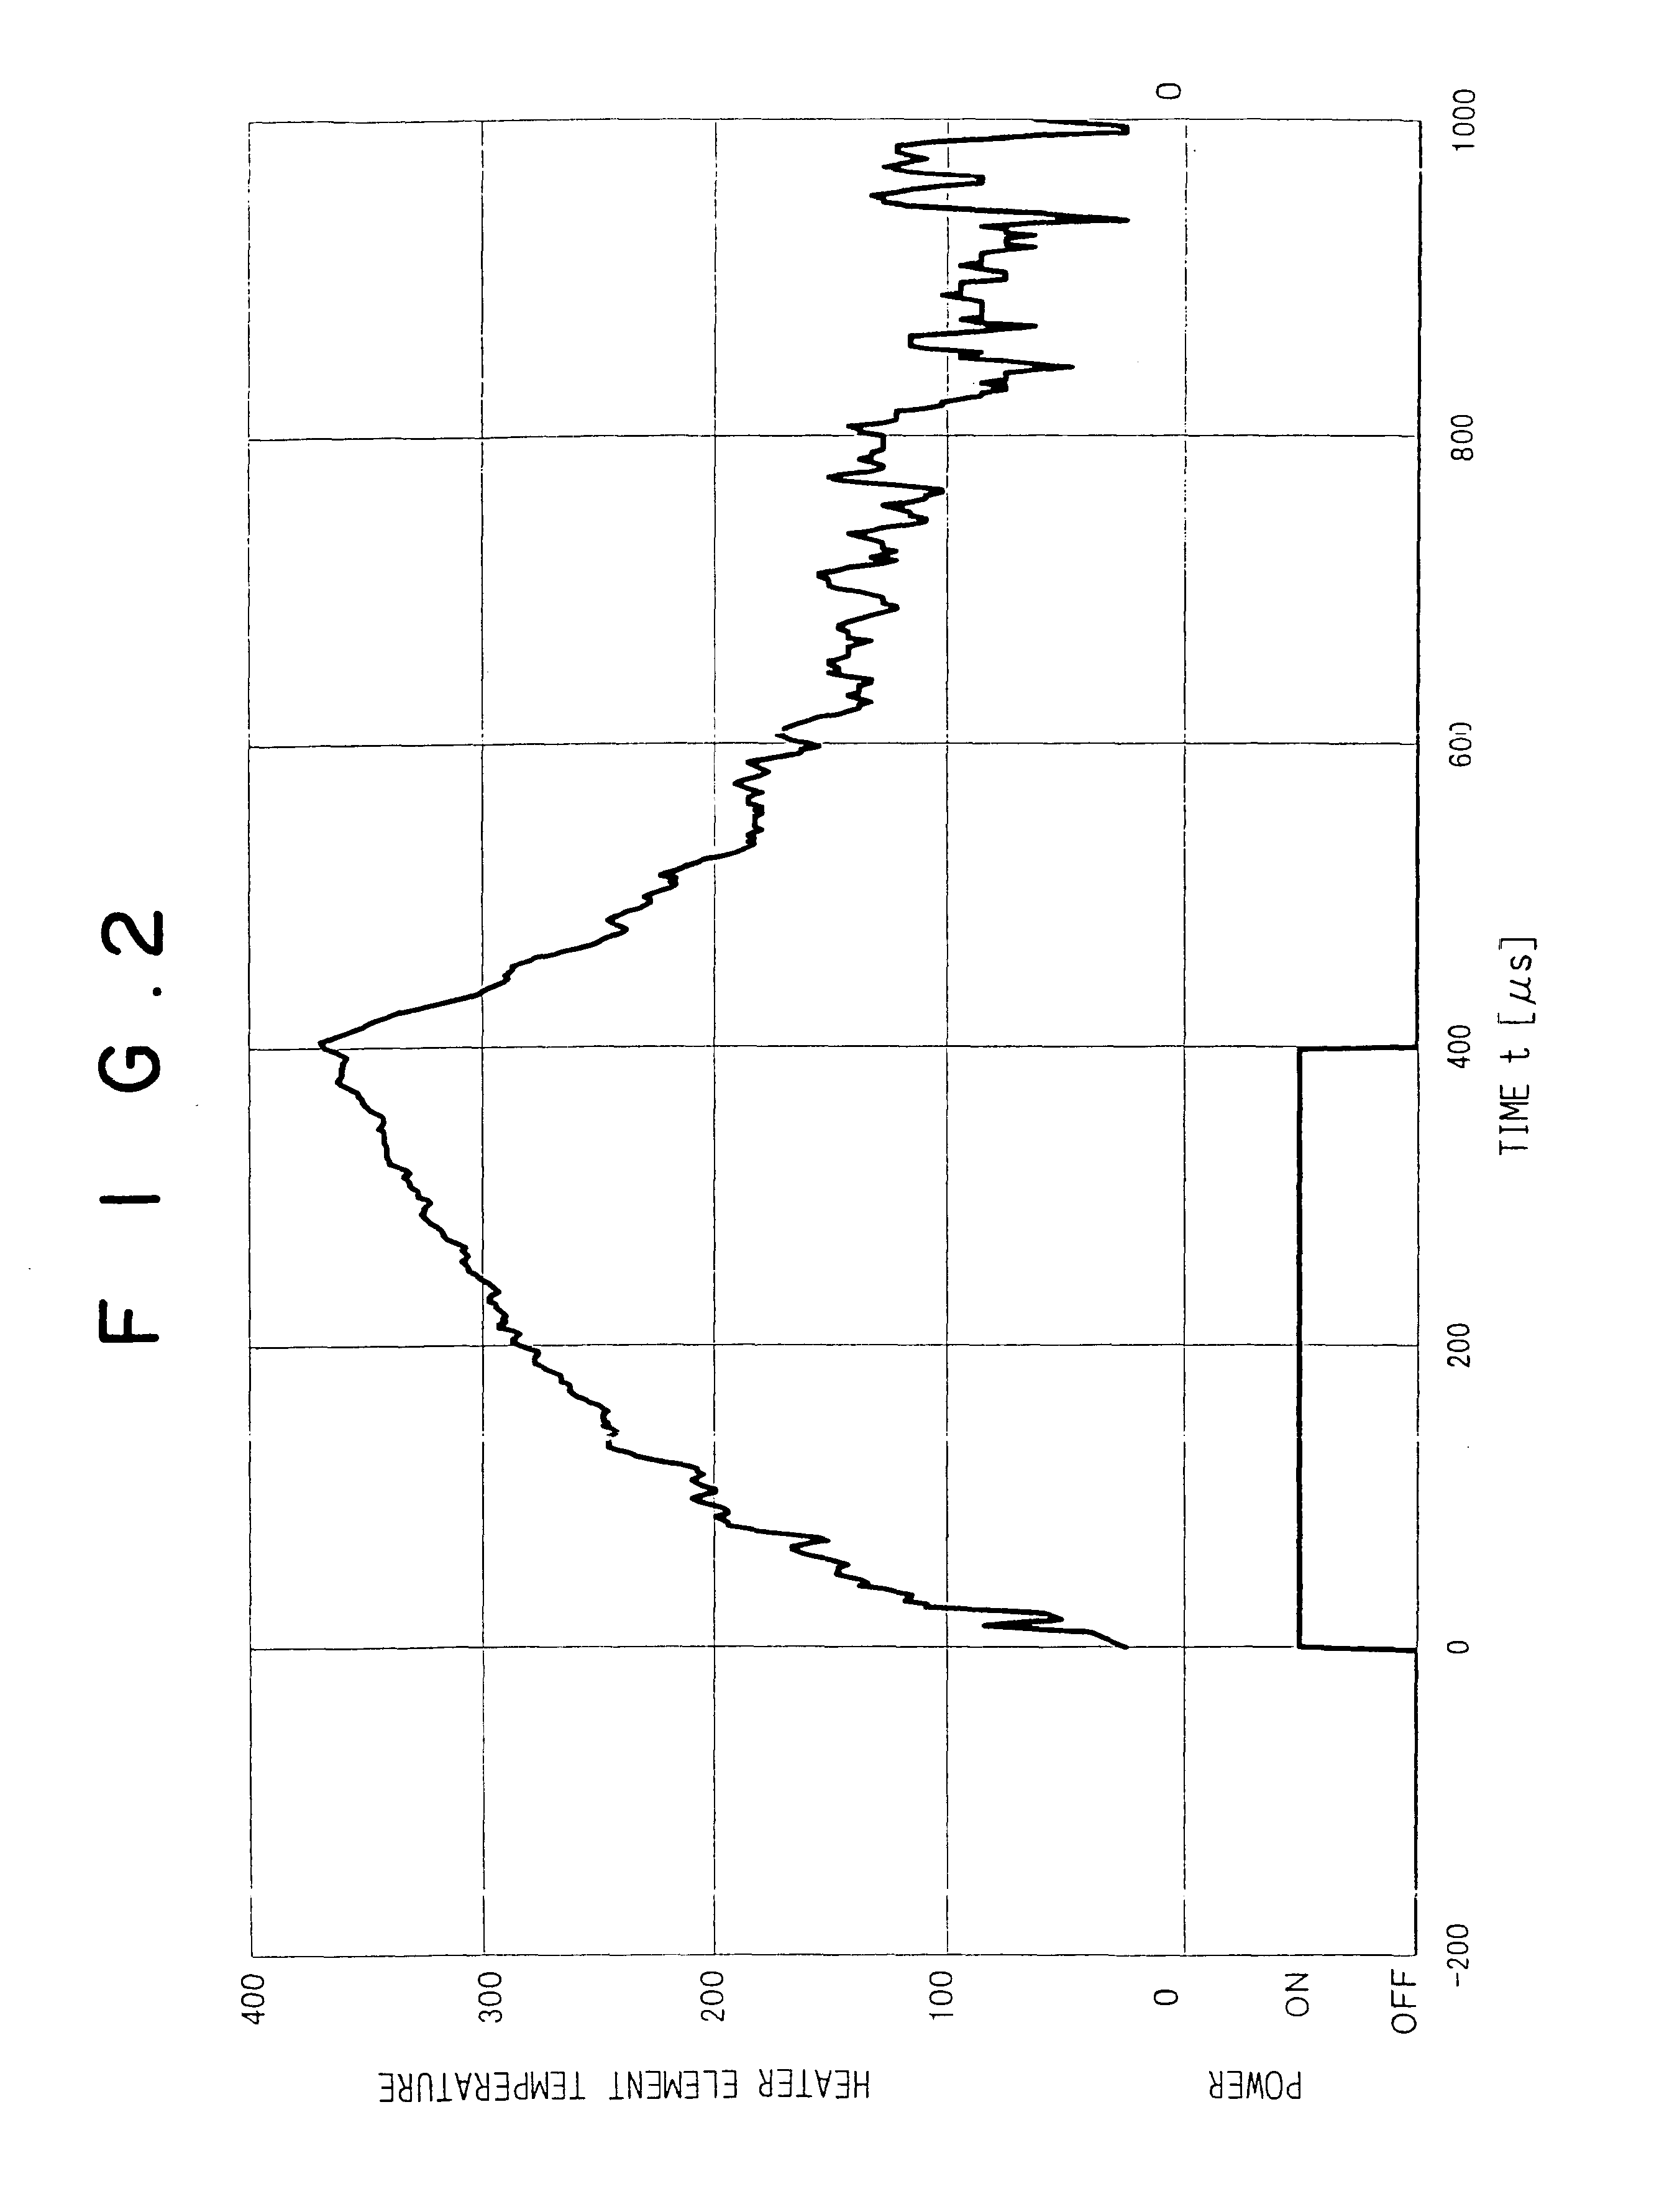 Method of thermally perforating a heat sensitive stencil